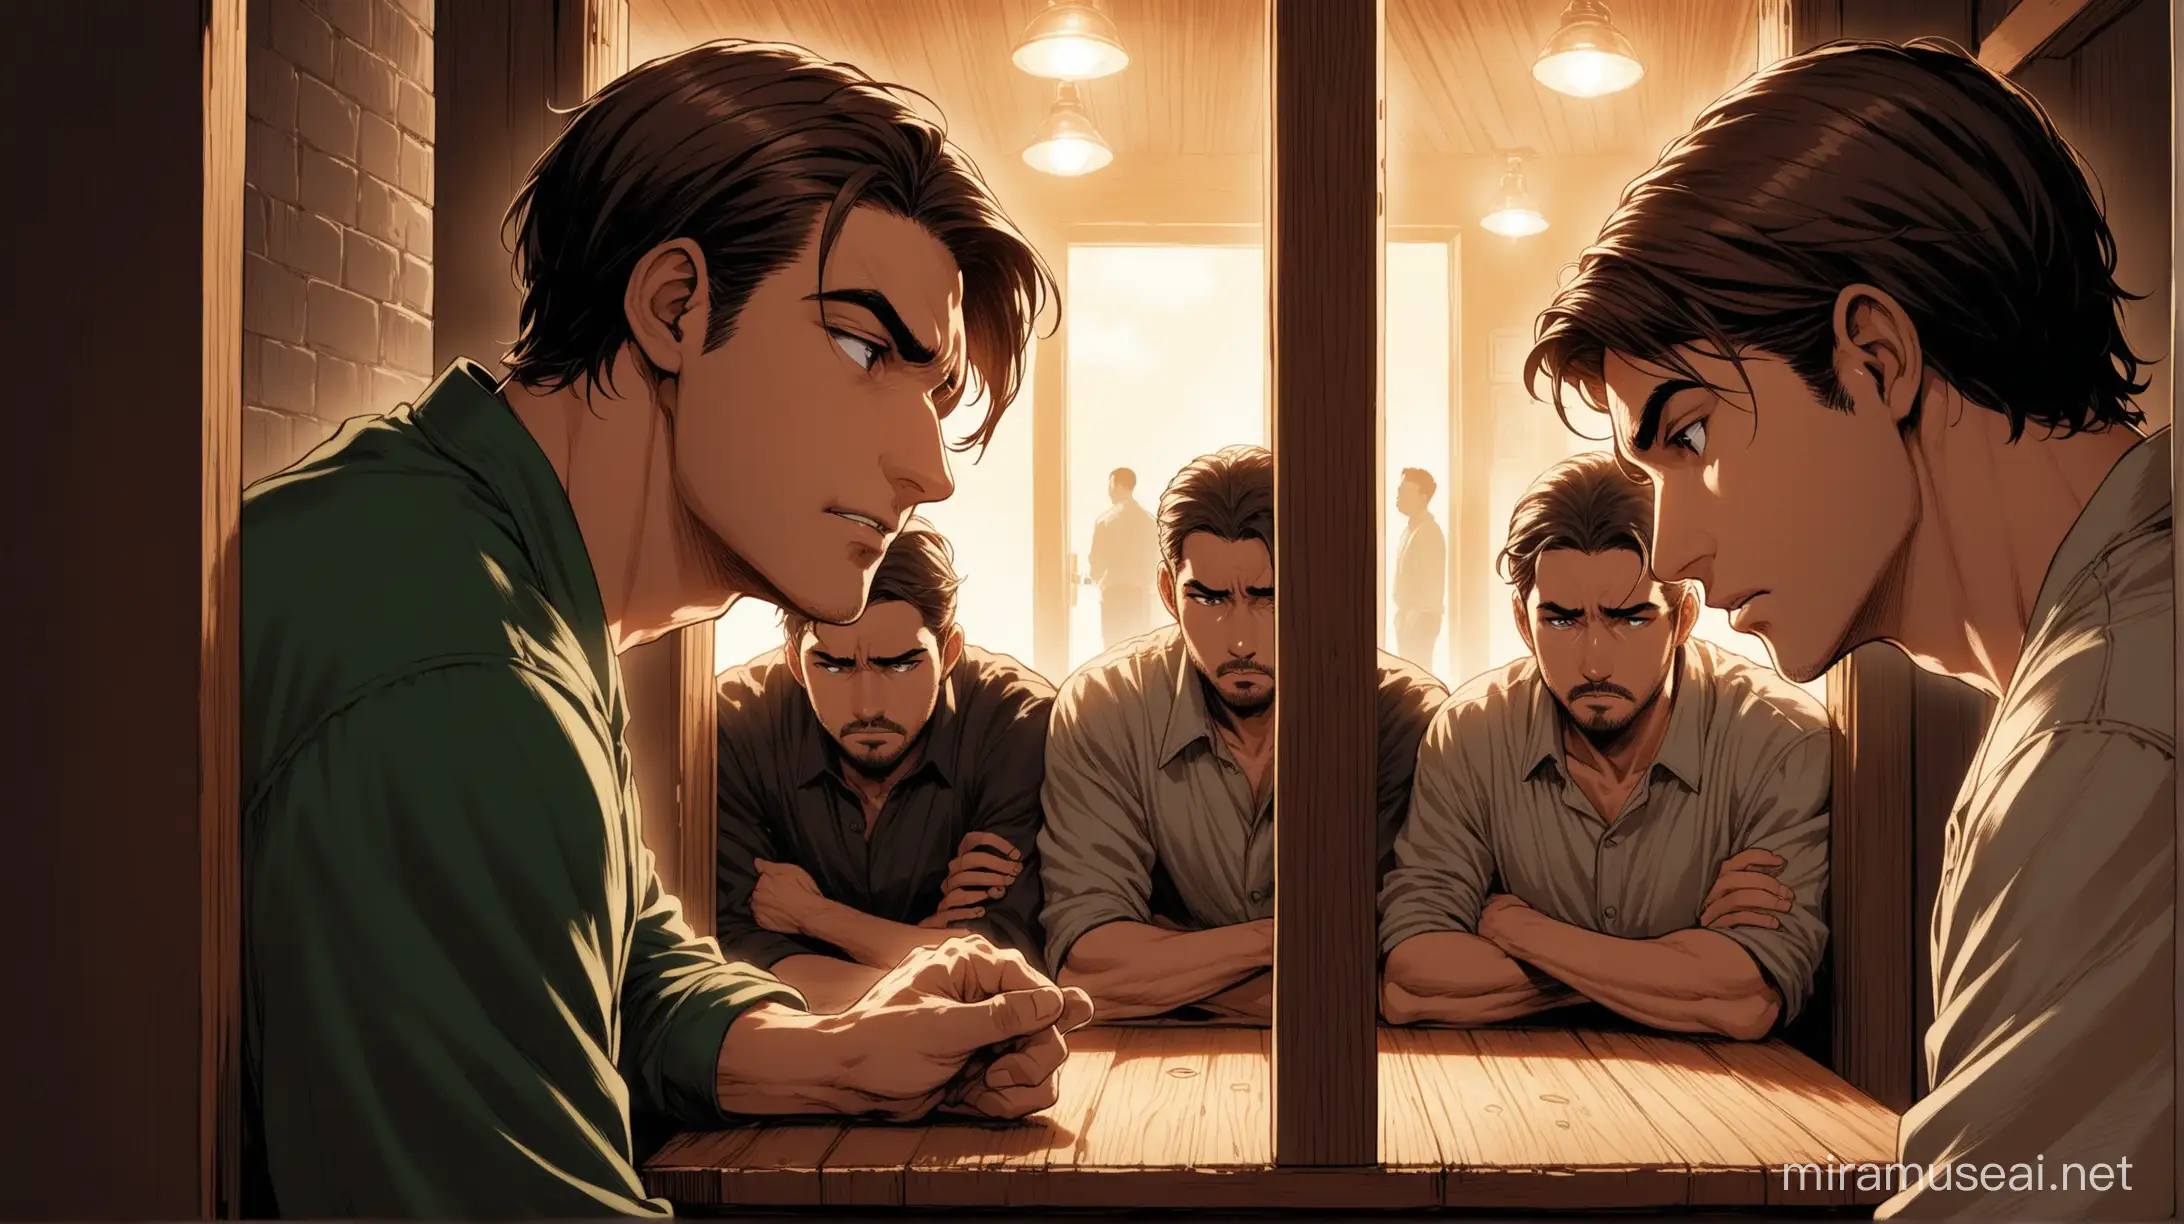 A man in his mid-20s with short brown hair stands at the exit of a well-lit bar, his posture slumped and shoulders defeated. A look of deep sadness and betrayal clouds his face. Through the doorway, he sees his three friends, also men from diverse backgrounds, huddled closely around a table. Their faces are etched with negativity; brows furrowed and mouths turned downwards, as they speak in hushed but intense tones. The man's gaze is fixated on them, his hand gripping the doorknob tightly. It's clear he's overheard something he wasn't meant to
